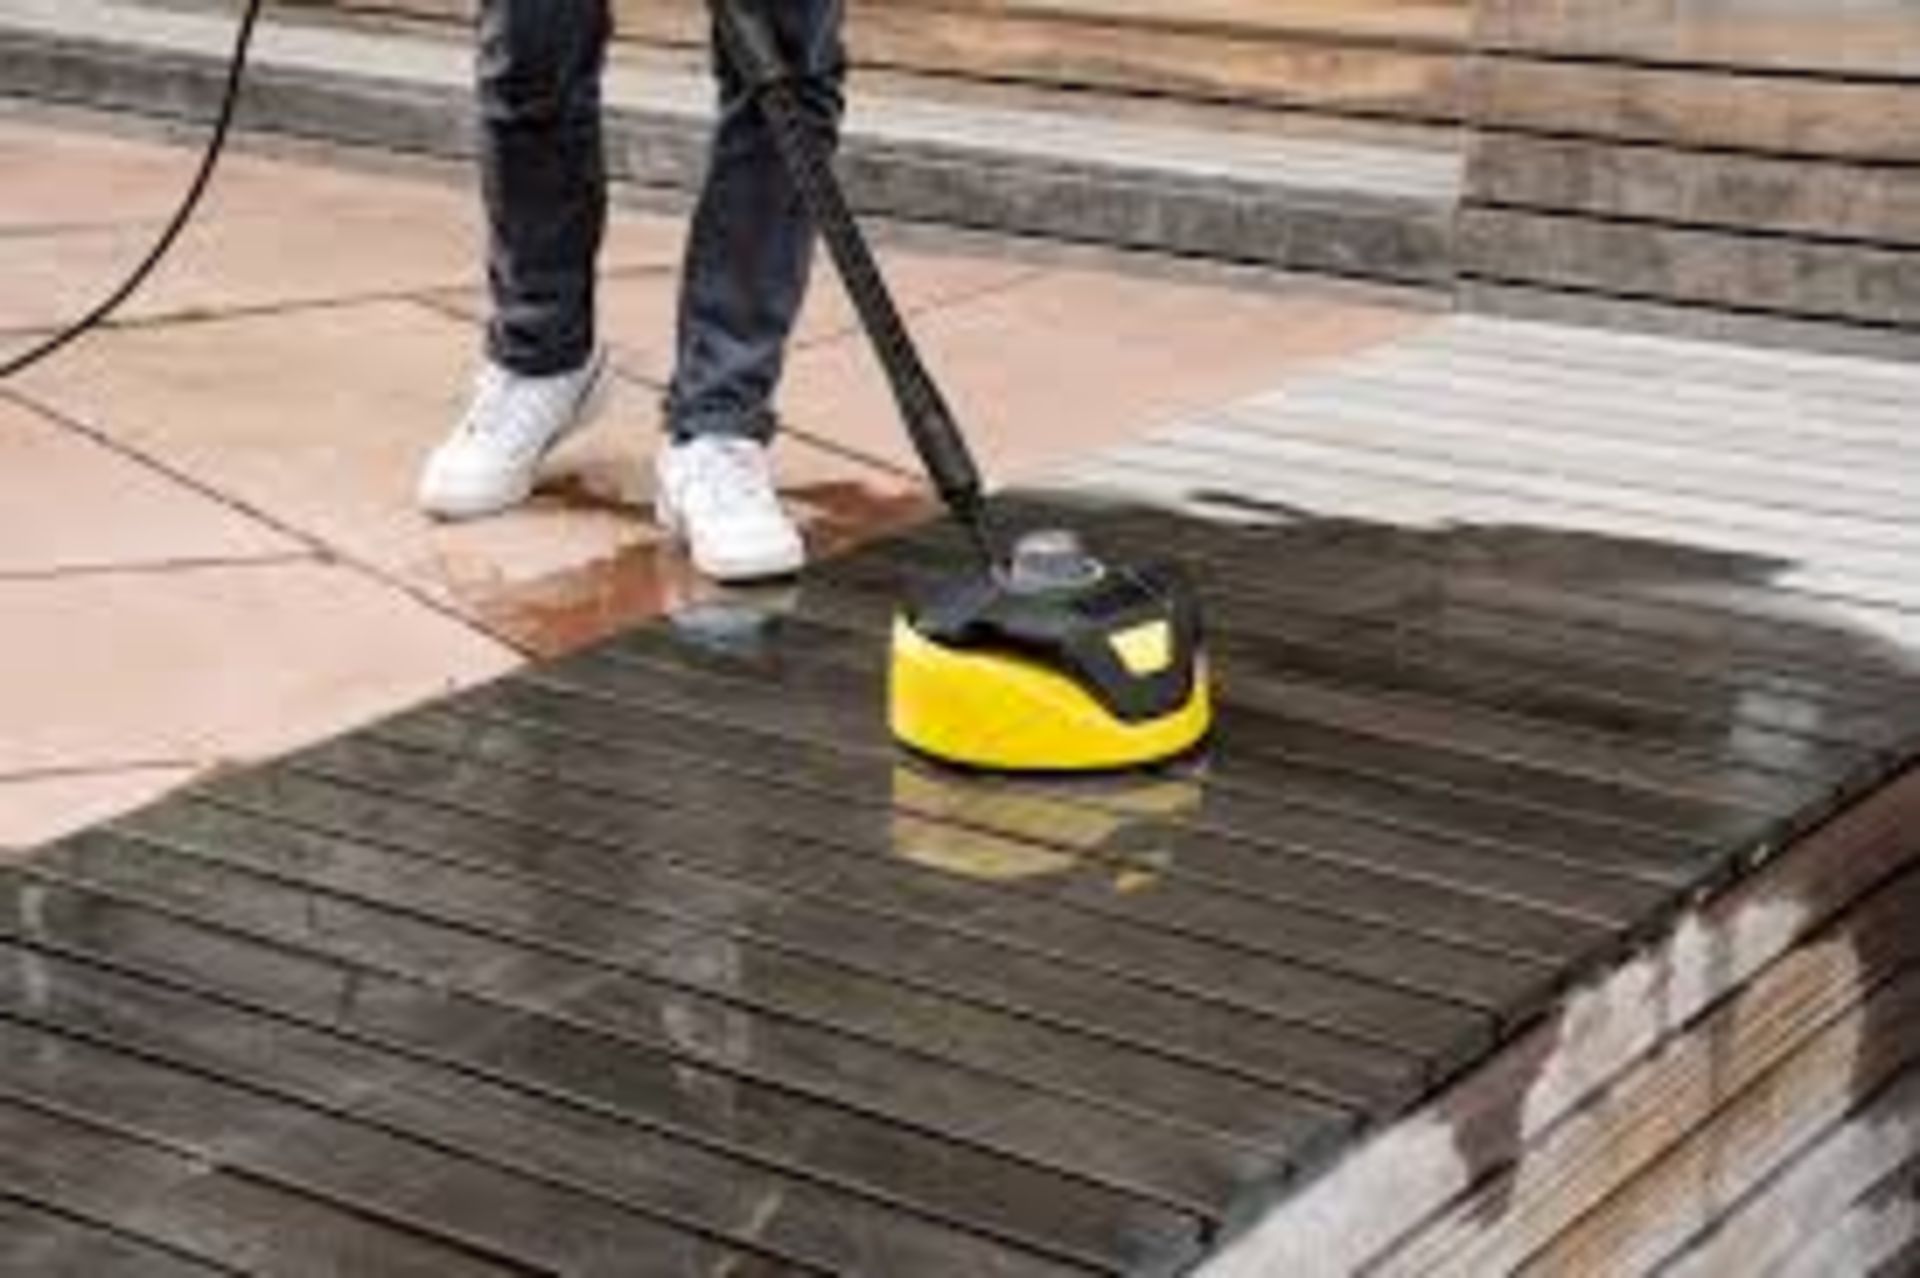 Kärcher T 5 T-Racer surface cleaner Pressure washer patio & decking cleaner (Dia)28cm. - S2. The